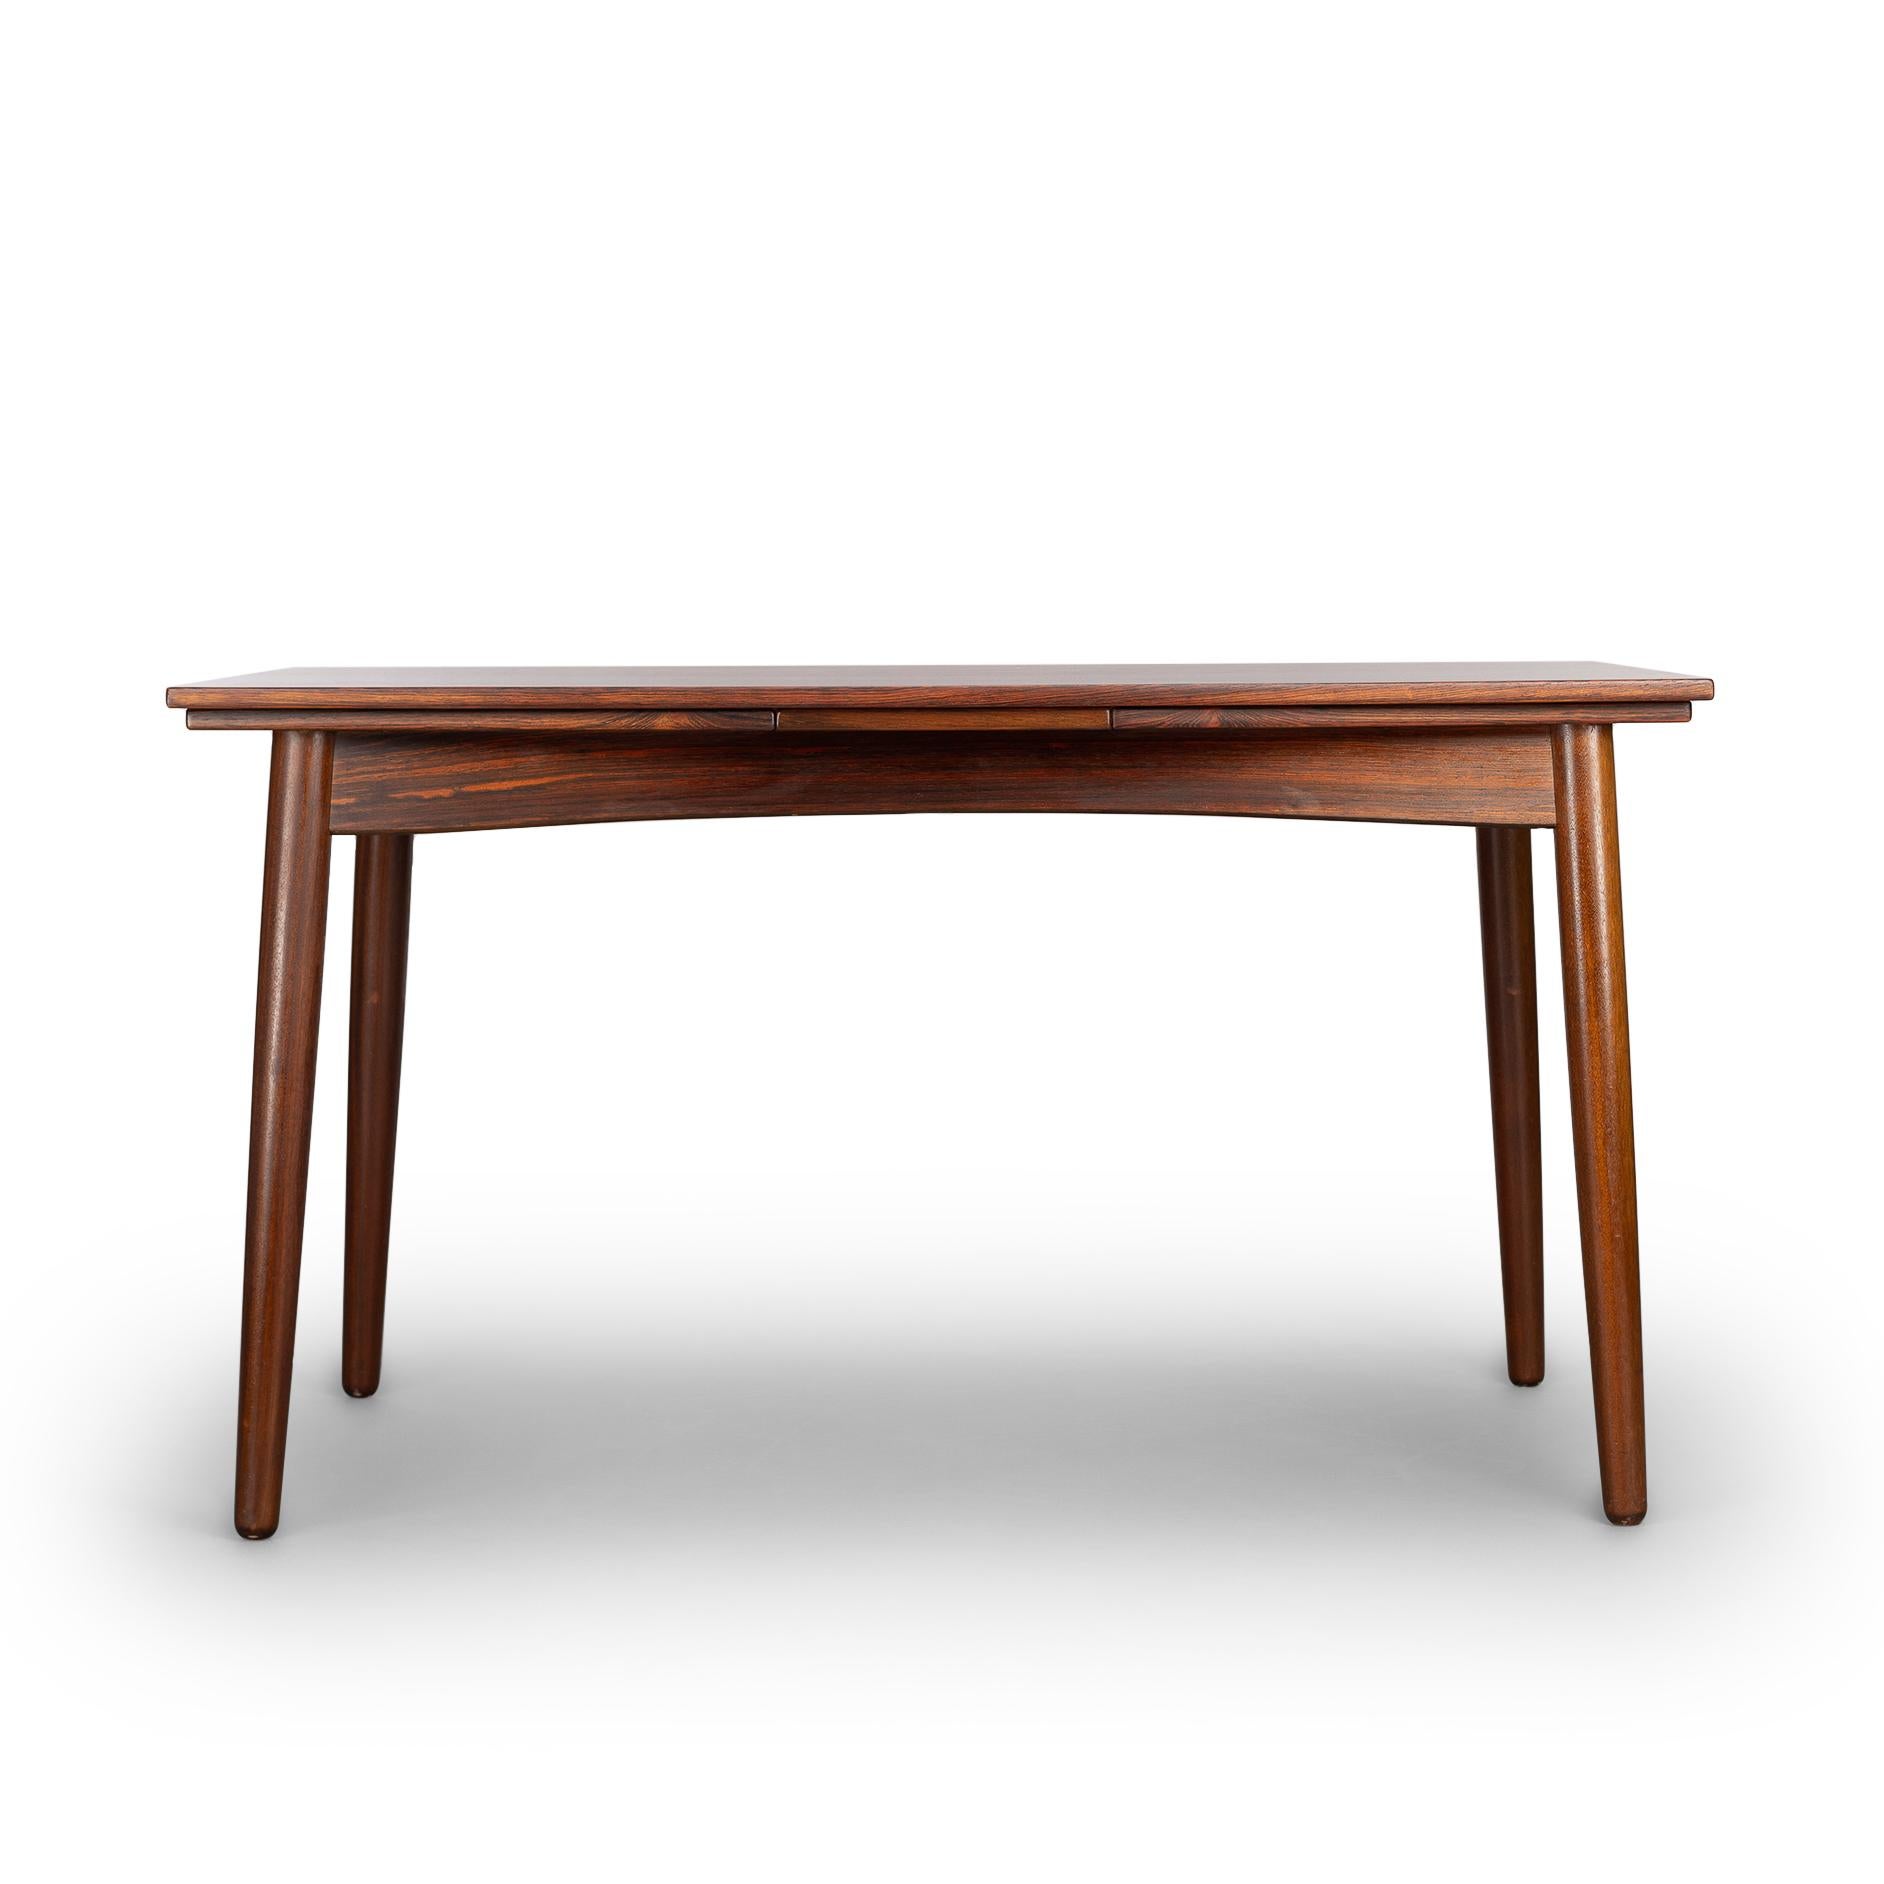 Mid-20th Century Mahogany Extendable Dining Table by Kai Kristiansen for Fm Møbler, 1960s